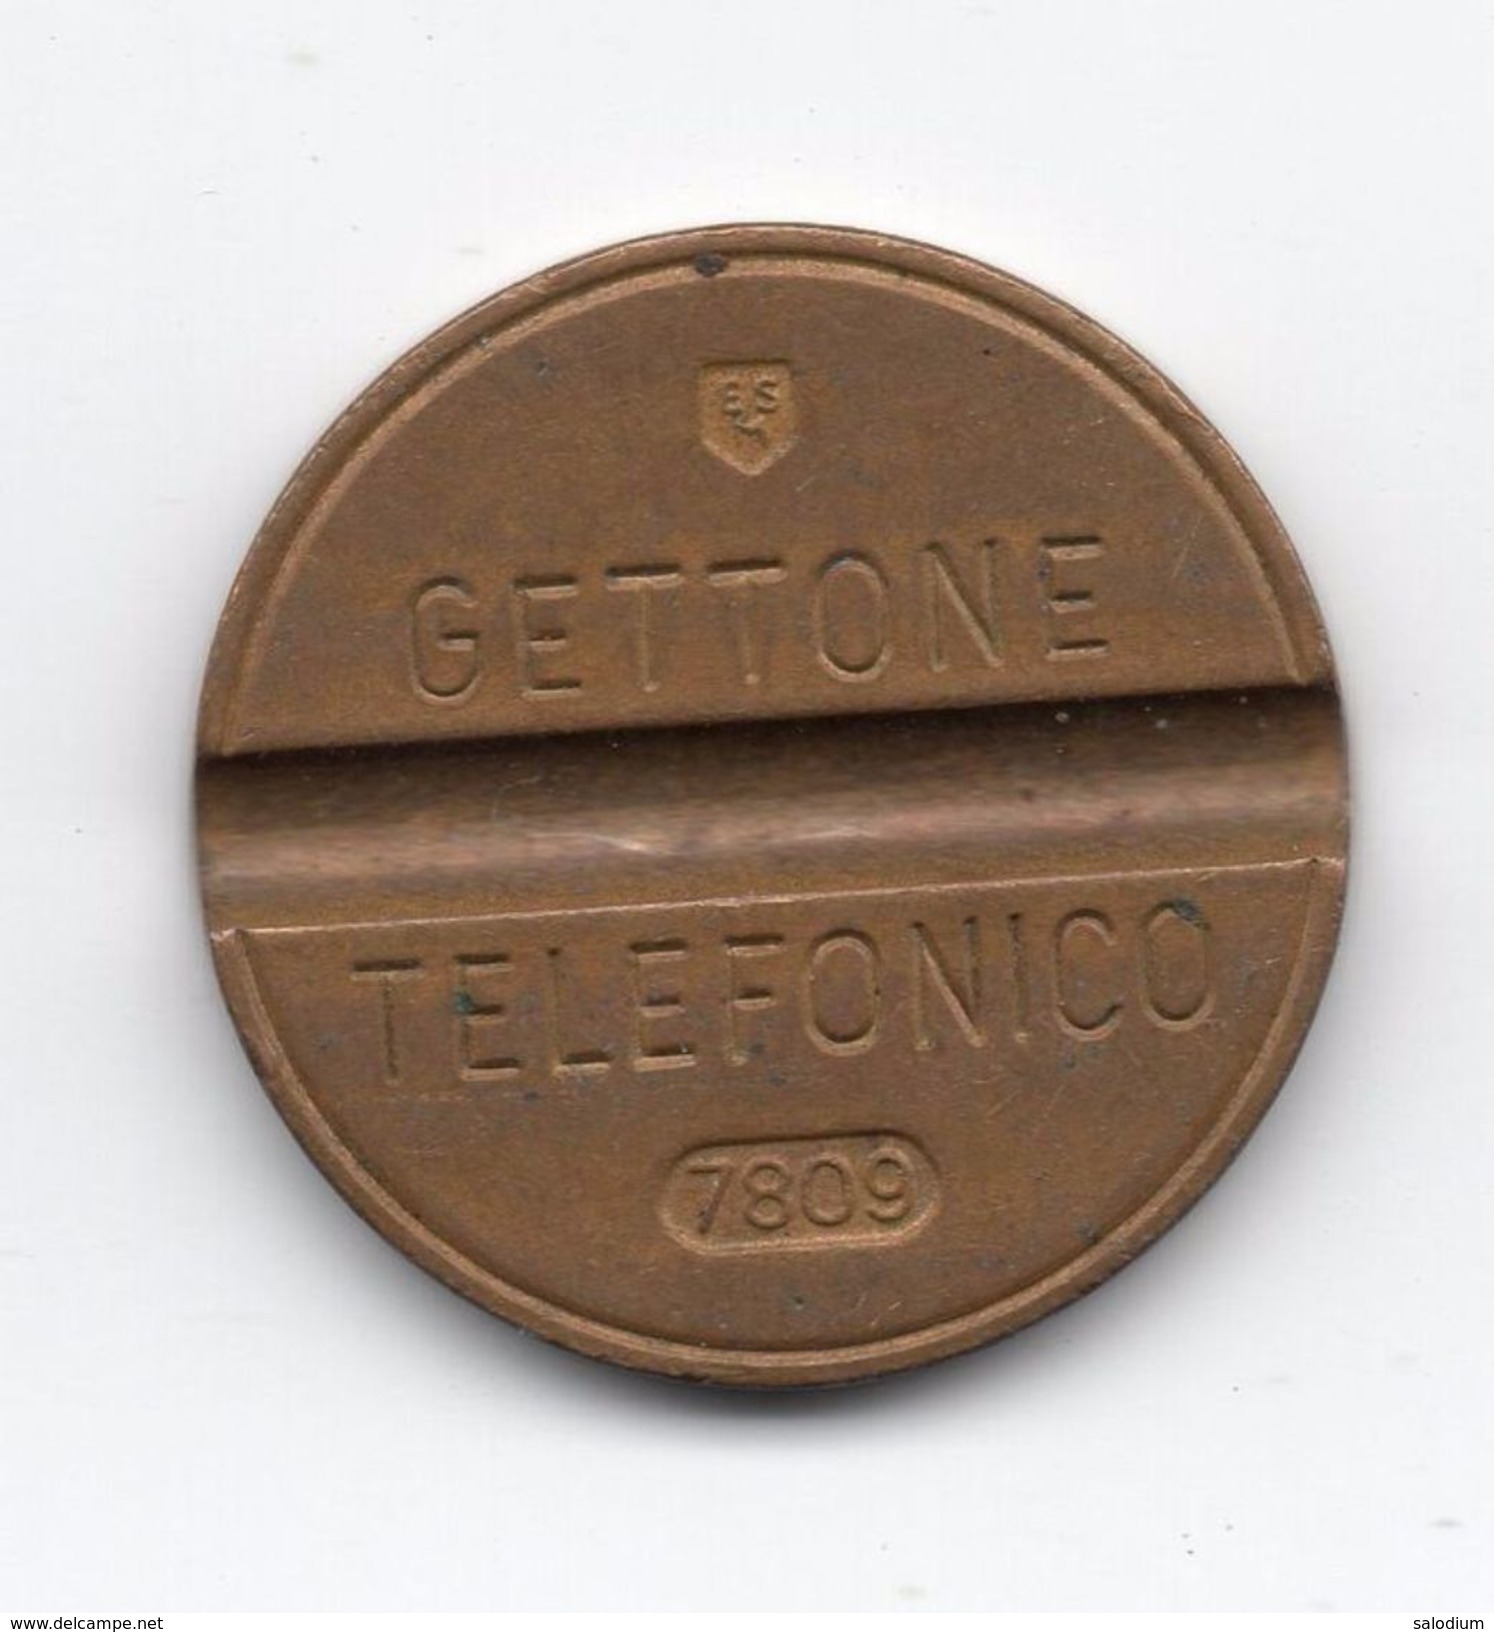 Gettone Telefonico 7809 Token Telephone - (Id-818) - Professionals/Firms